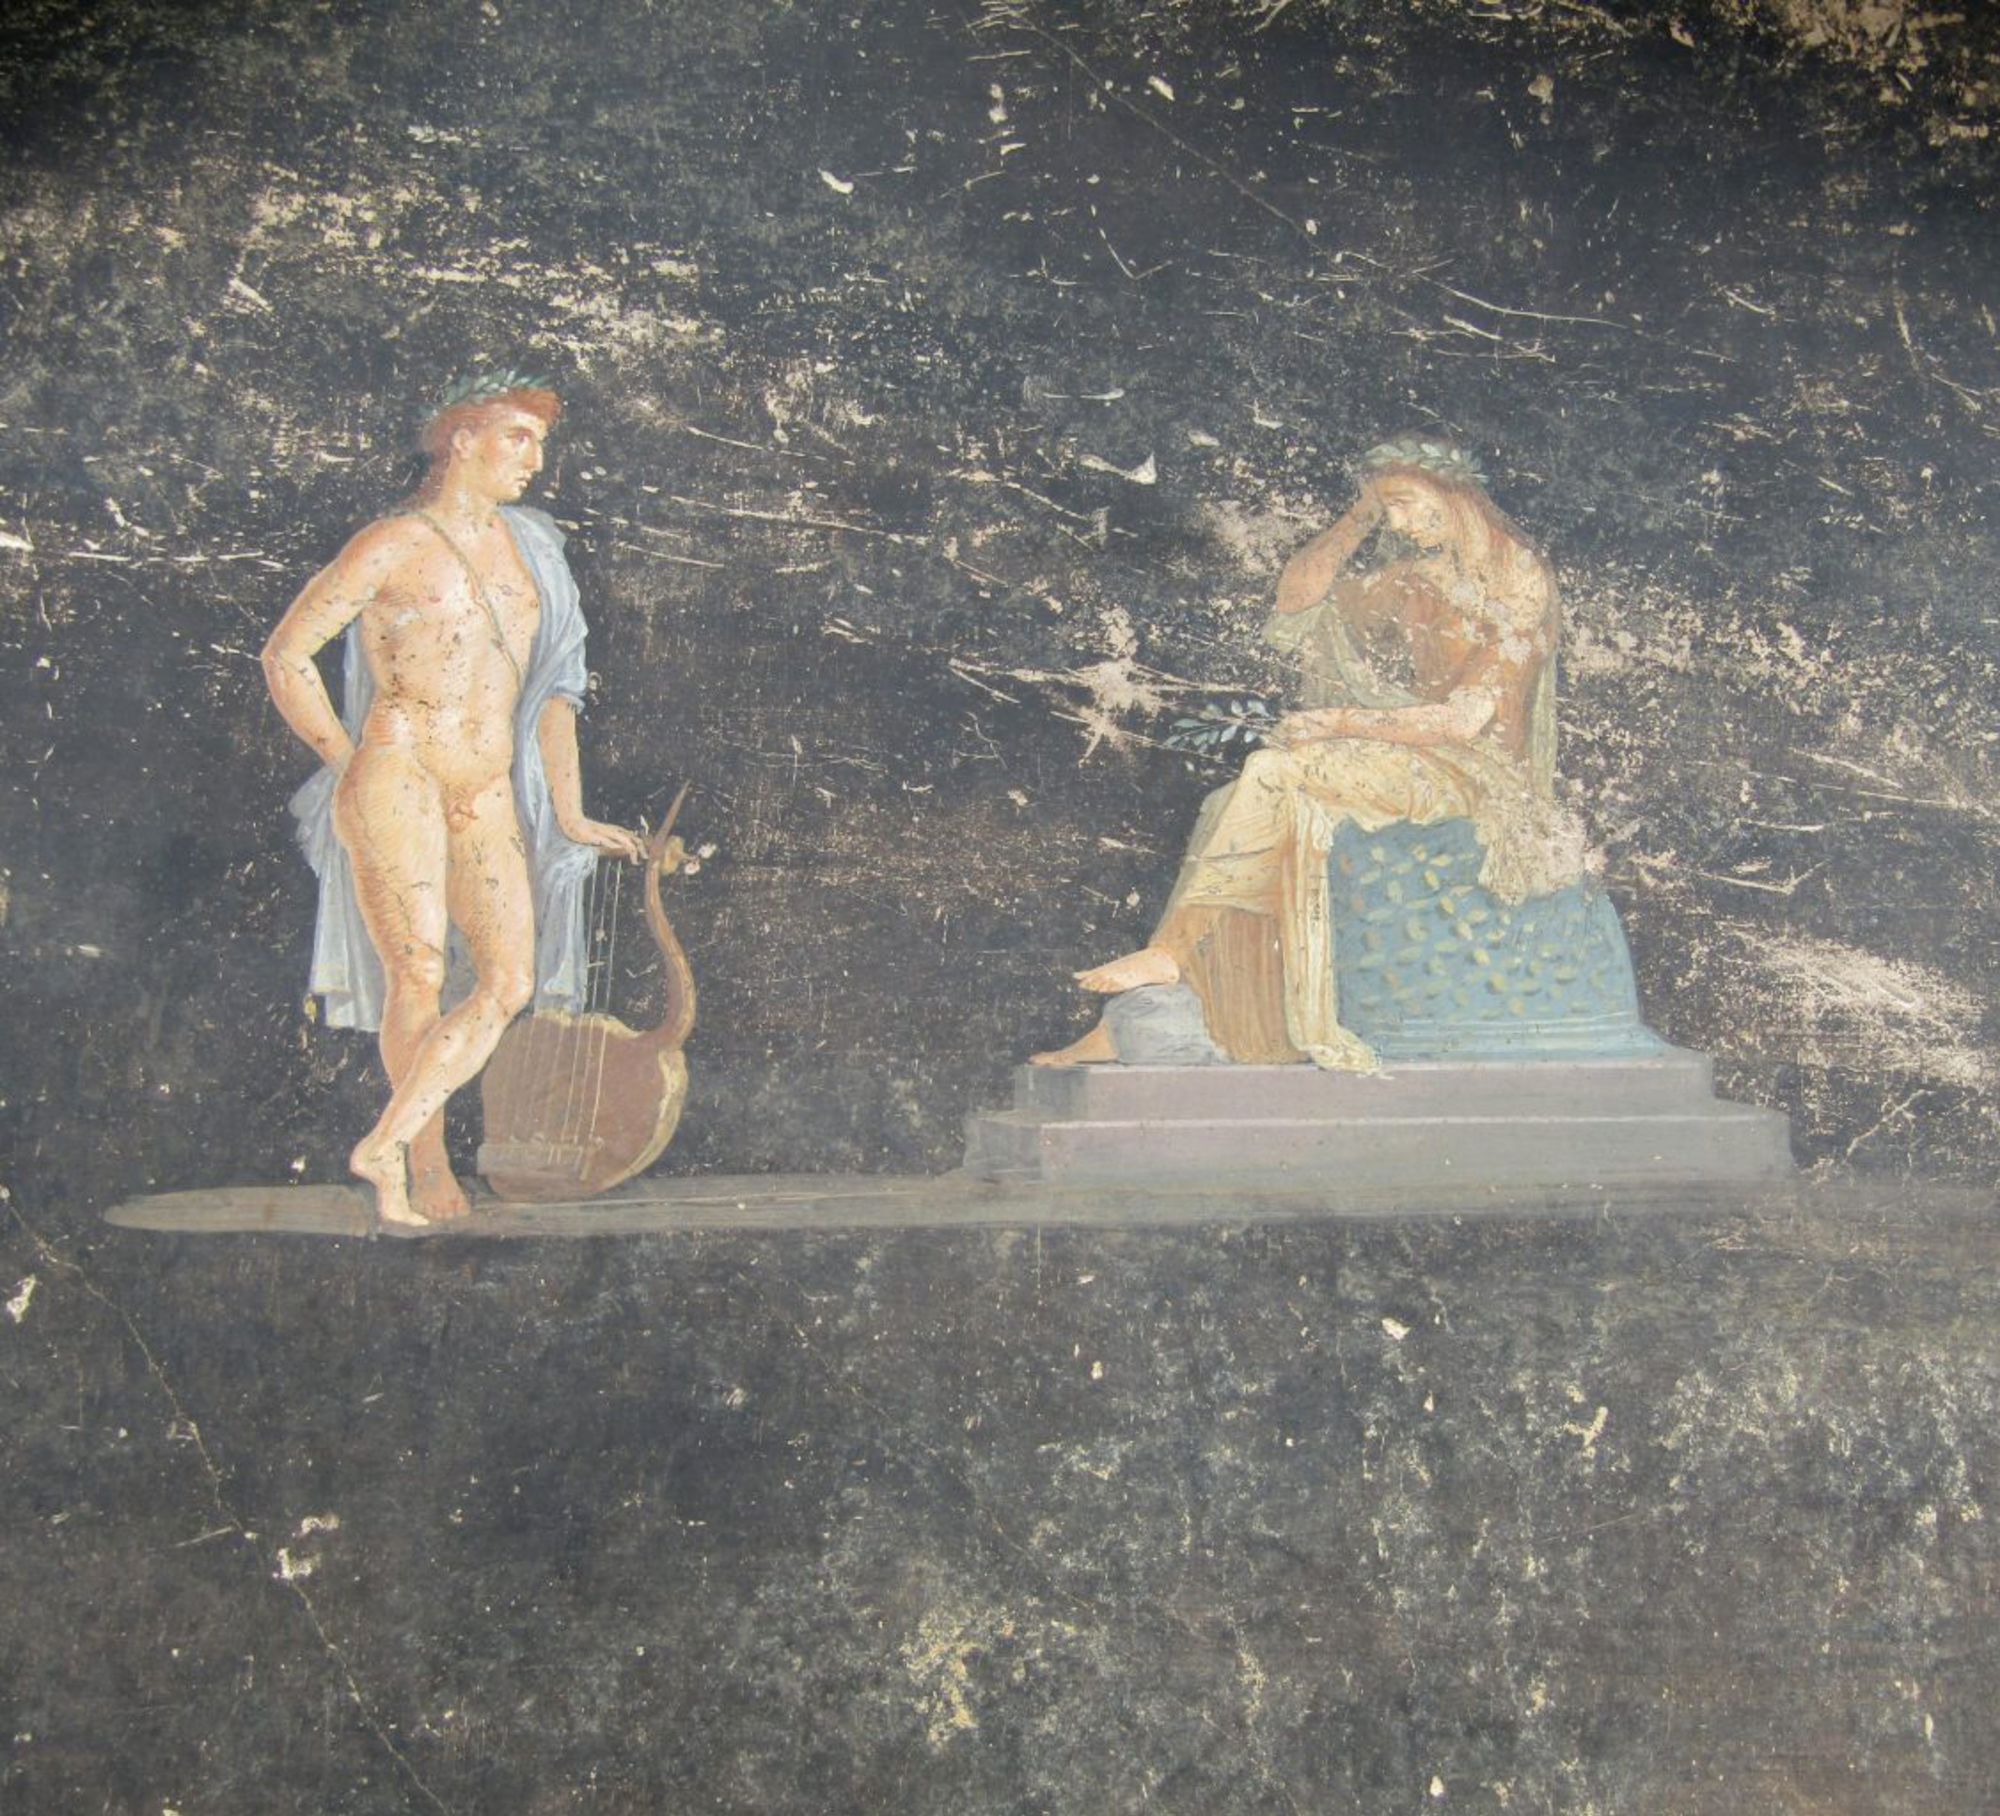 A fresco depicts the mythological character of ancient Greek god Apollo with a downcast Cassandra, daughter of King Priam of Troy.